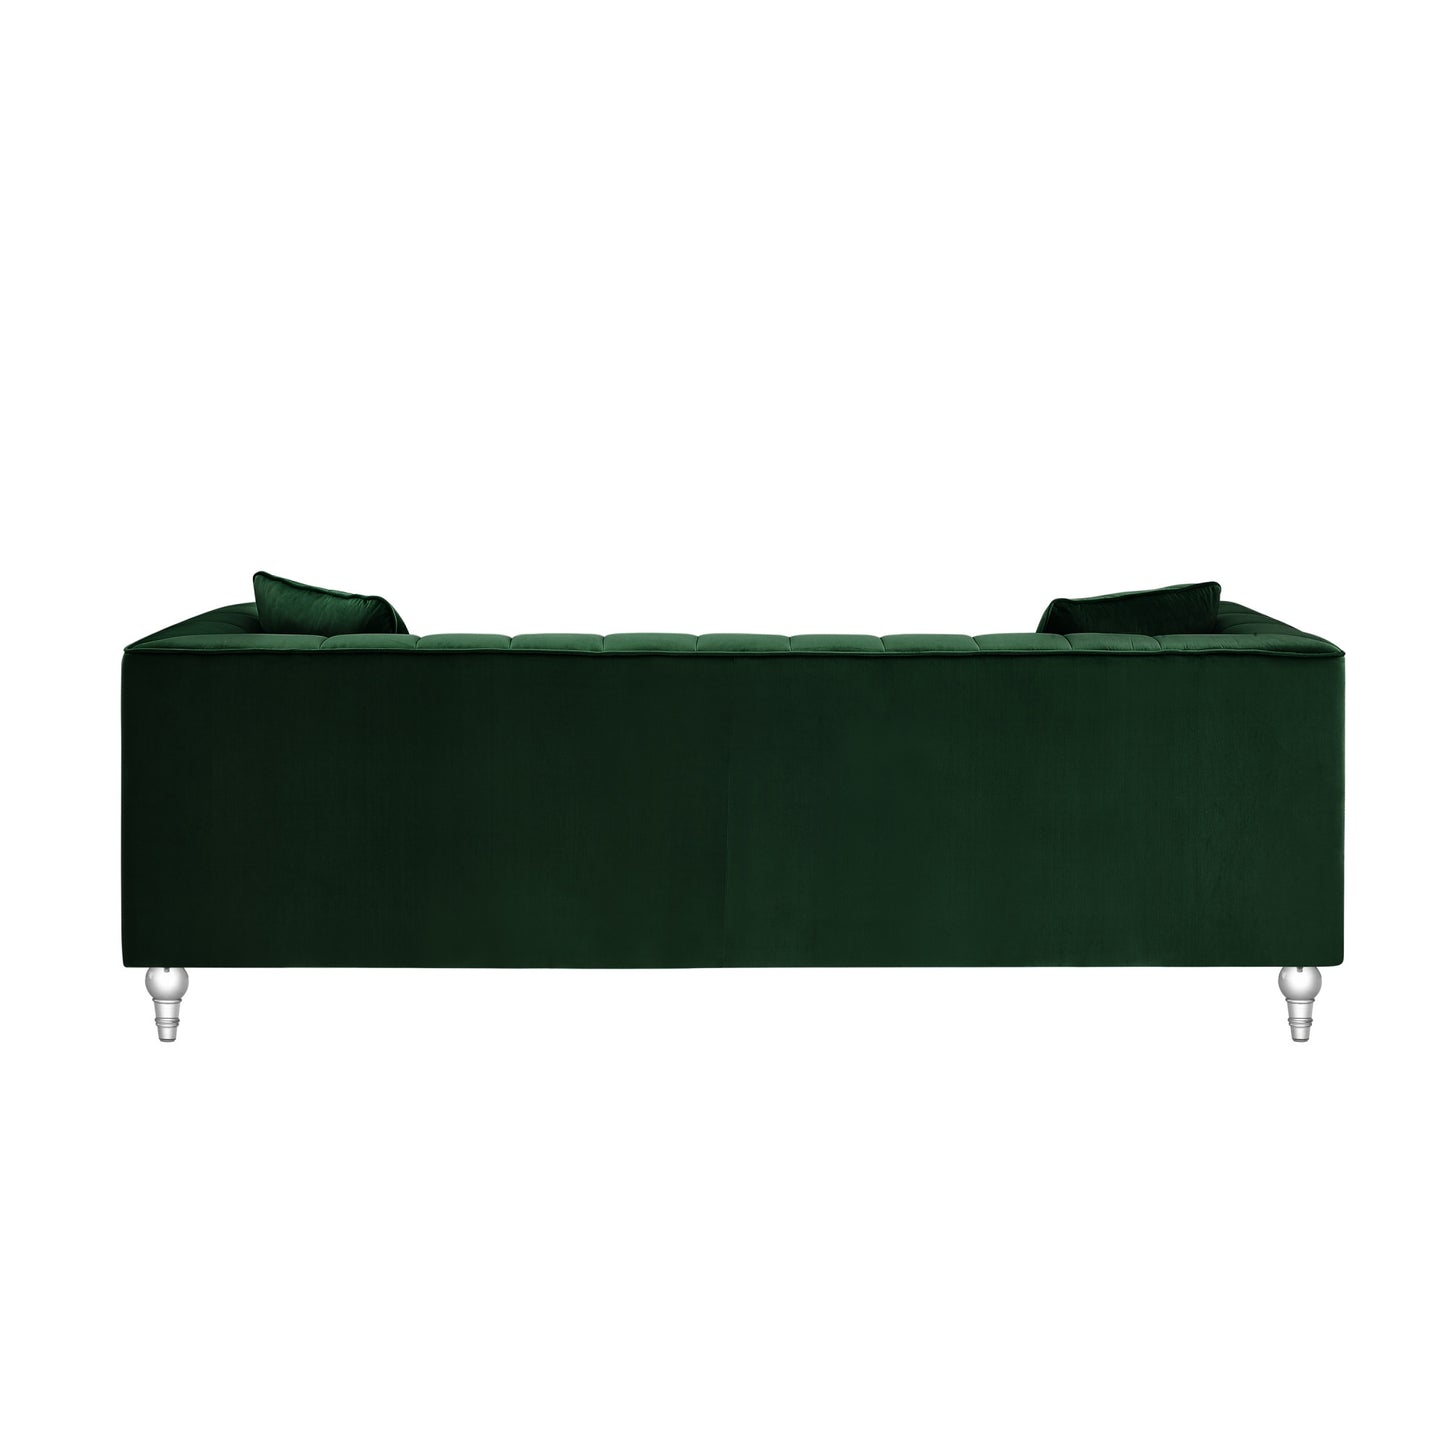 88" Hunter Green Velvet Sofa And Toss Pillows With Clear Legs